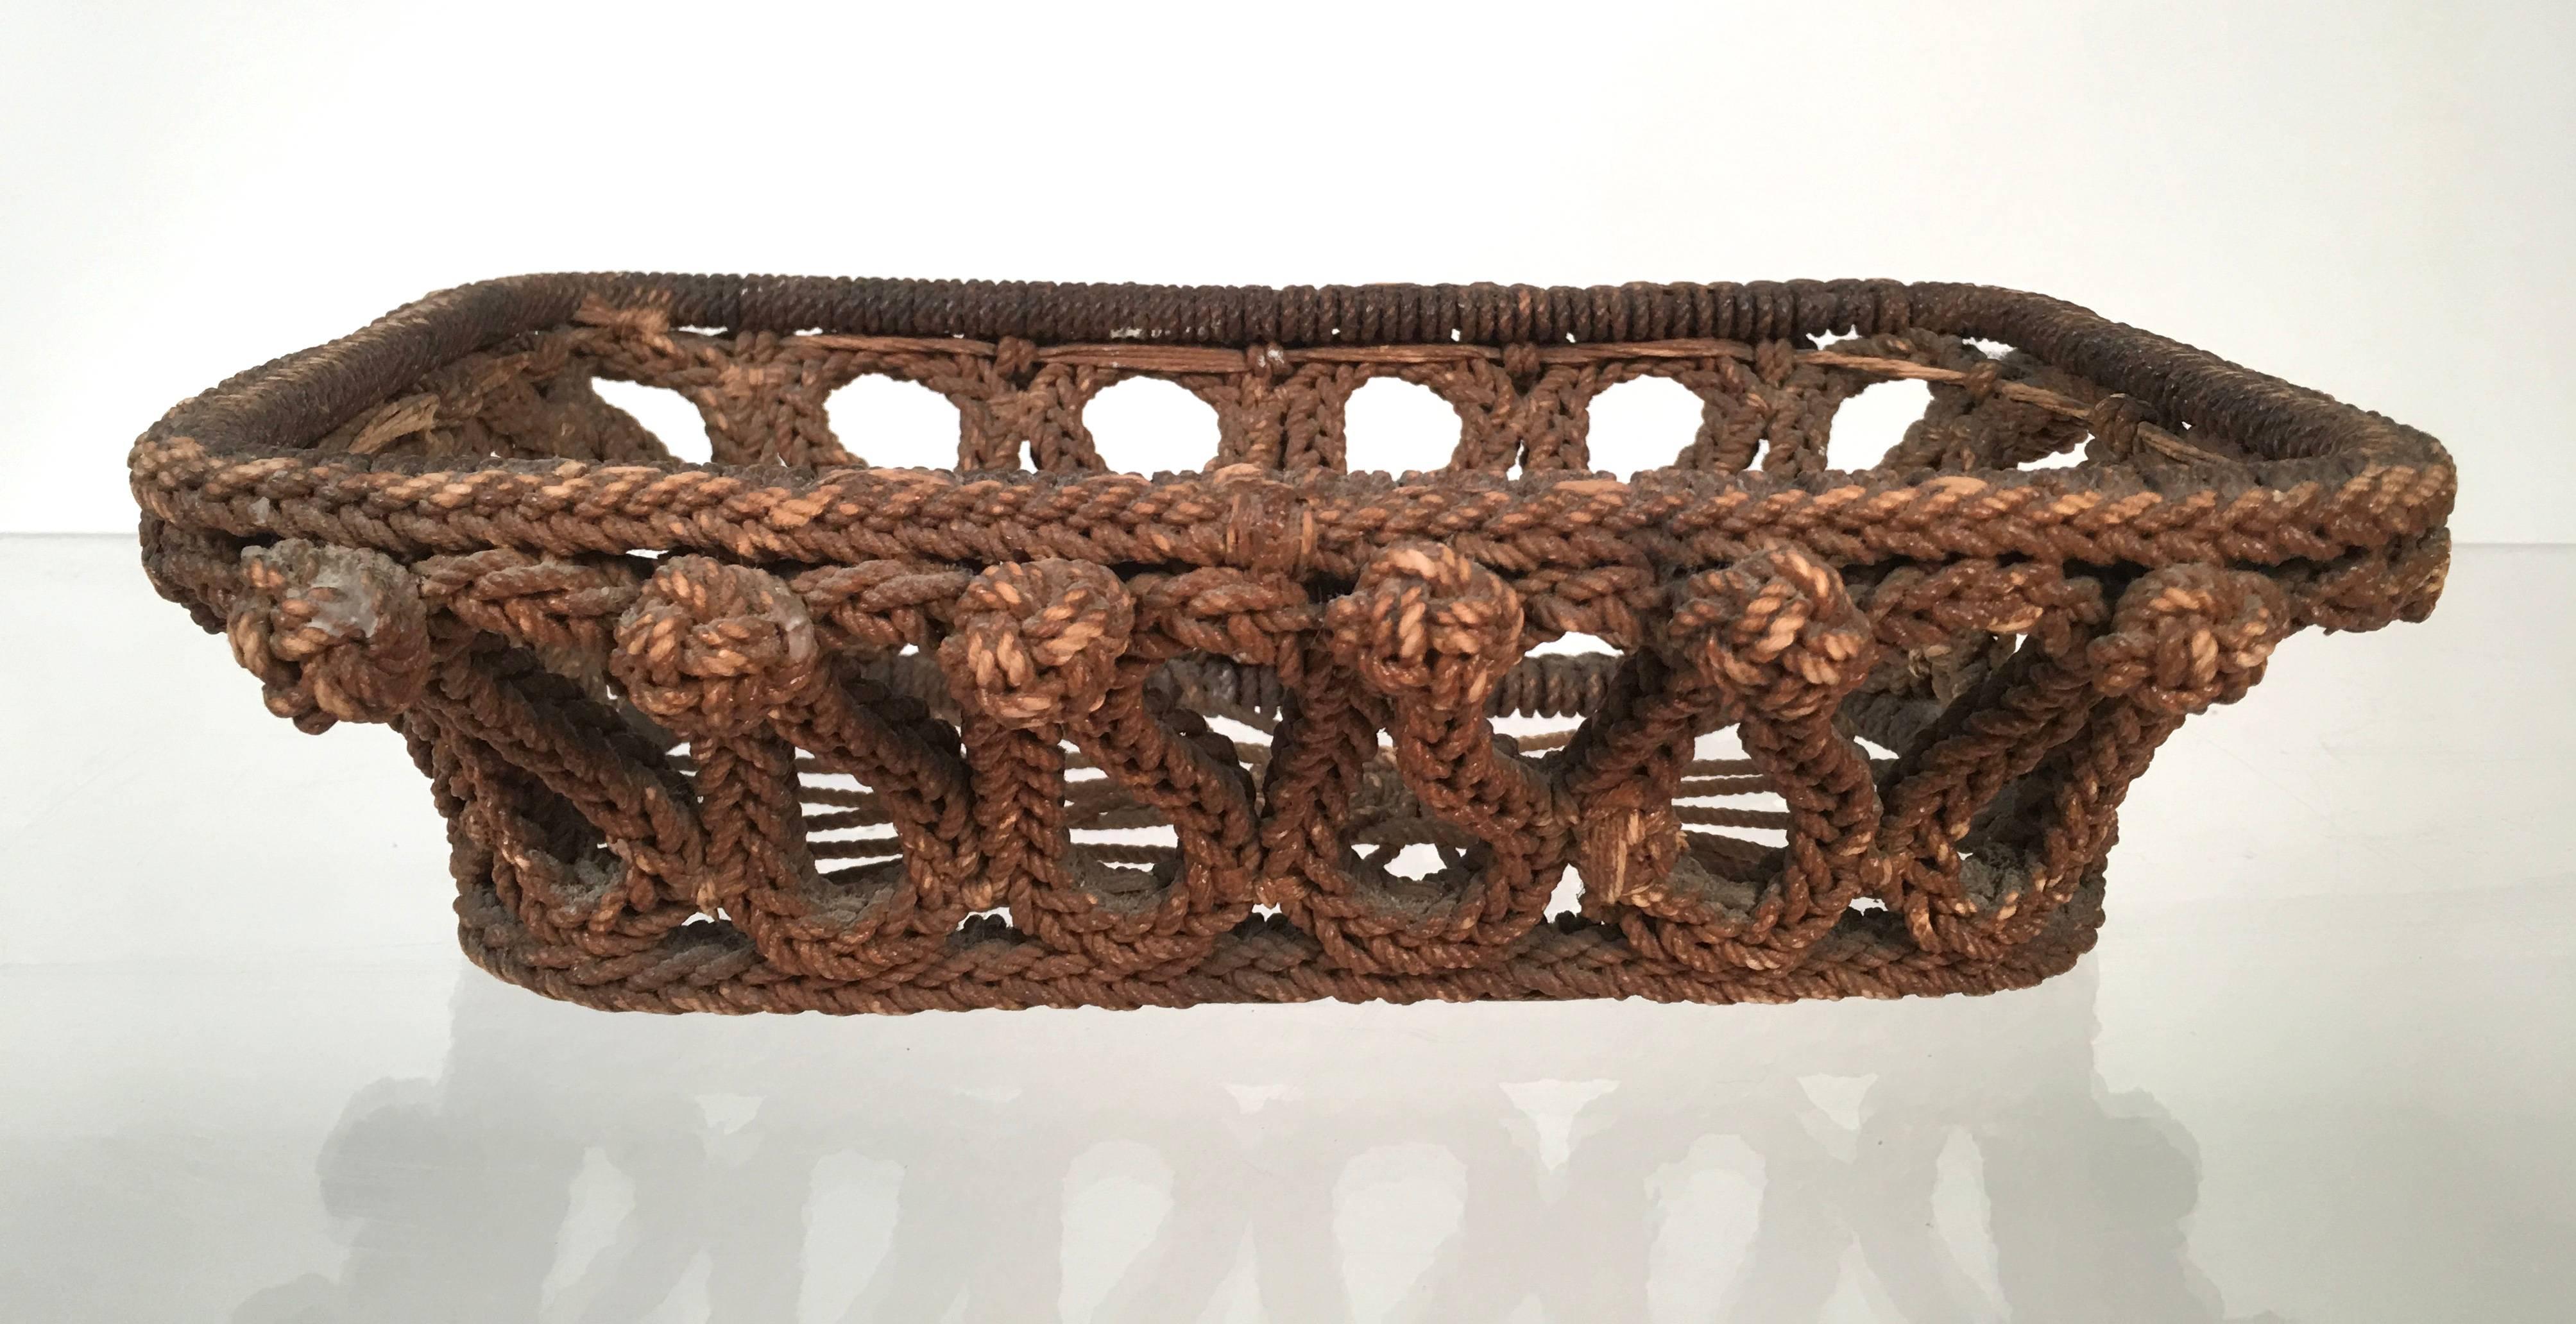 A  19th century sailor-made rope work basket with intricately knotted sides and openwork bottom. From sea chest handles, or beckets, to flask covers, balls and knife covers, sailors would use whatever extra cordage was available to make items both